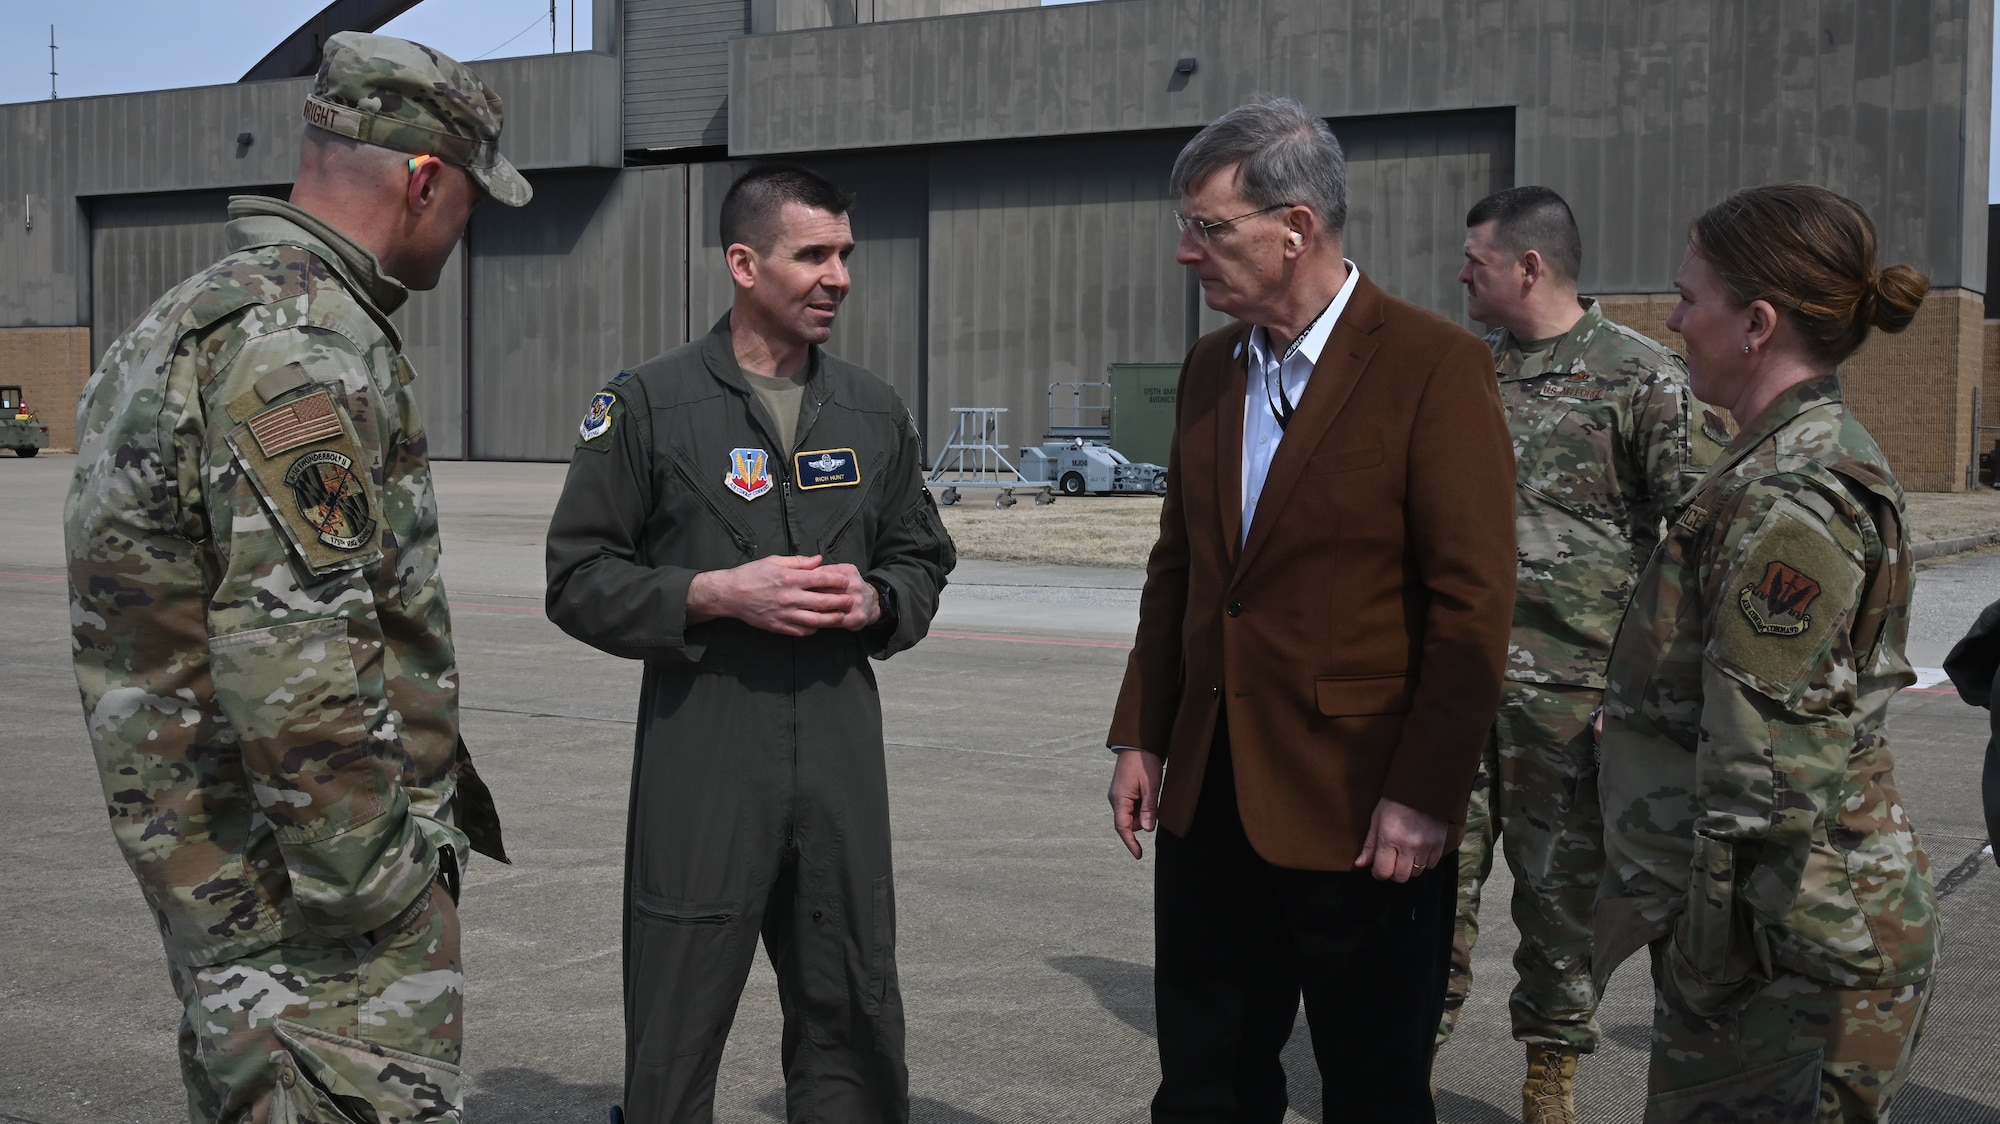 Mr. Devin Cate, center, executive director, Air National Guard, speaks with U.S. Air Force Col. Richard Hunt, (center left), 175th Wing vice commander, on March 5, 2022, during a visit to Warfield Air National Guard Base at Martin State Airport, Middle River, Maryland.  During the tour Cate visited the flightline where he had the opportunity to observe Airmen working as A-10C Thunderbolt IIs landed.  (U.S. Air National Guard photo by A1C Alexandra Huettner)